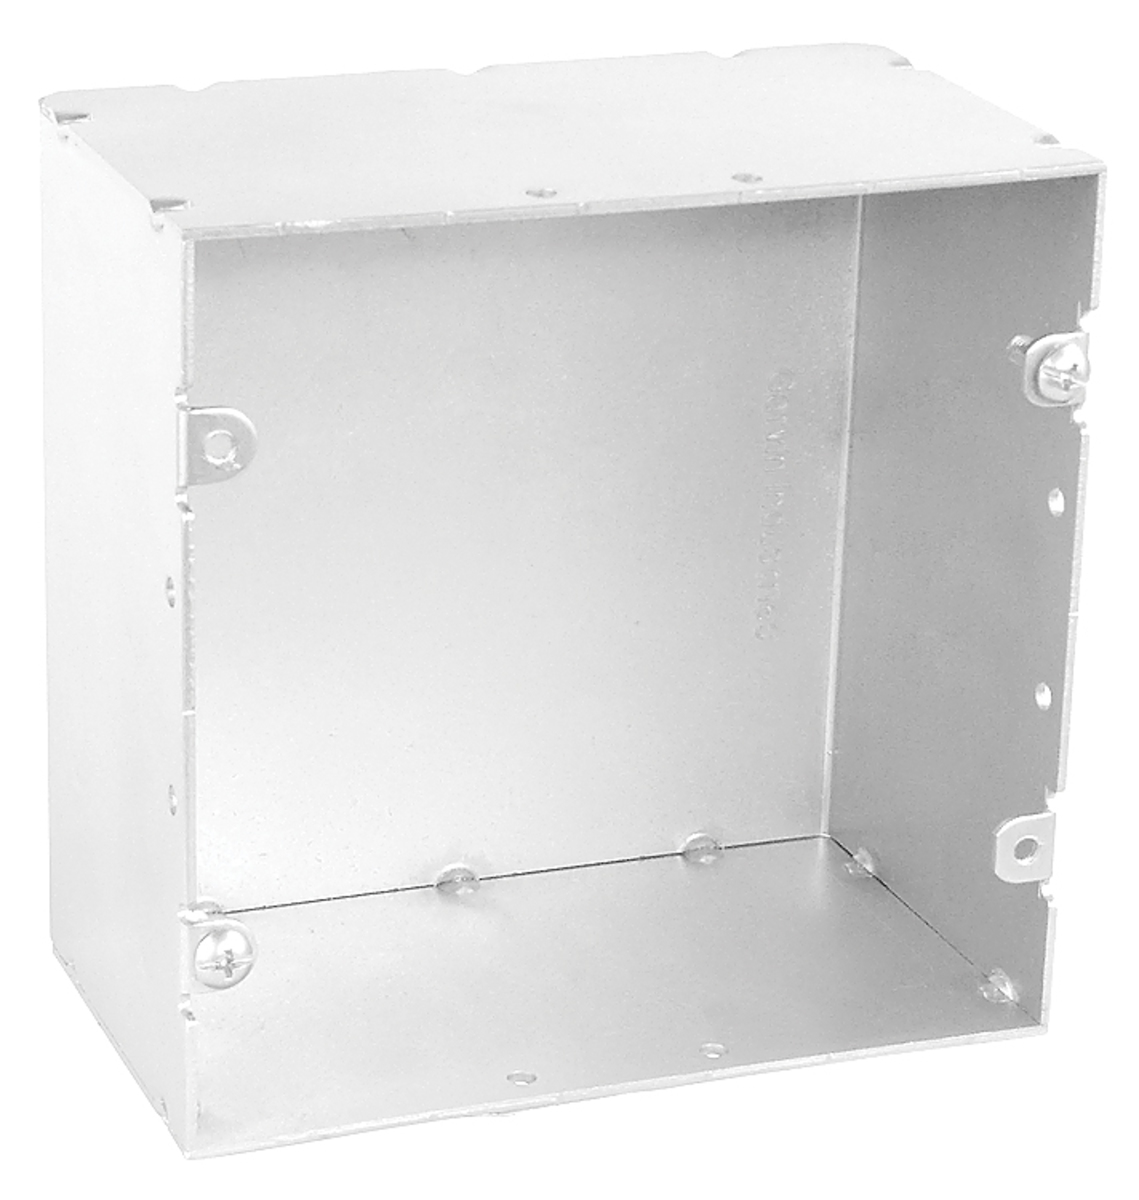 5" Square Box, 2-7/8" Deep - Welded, No Knockouts